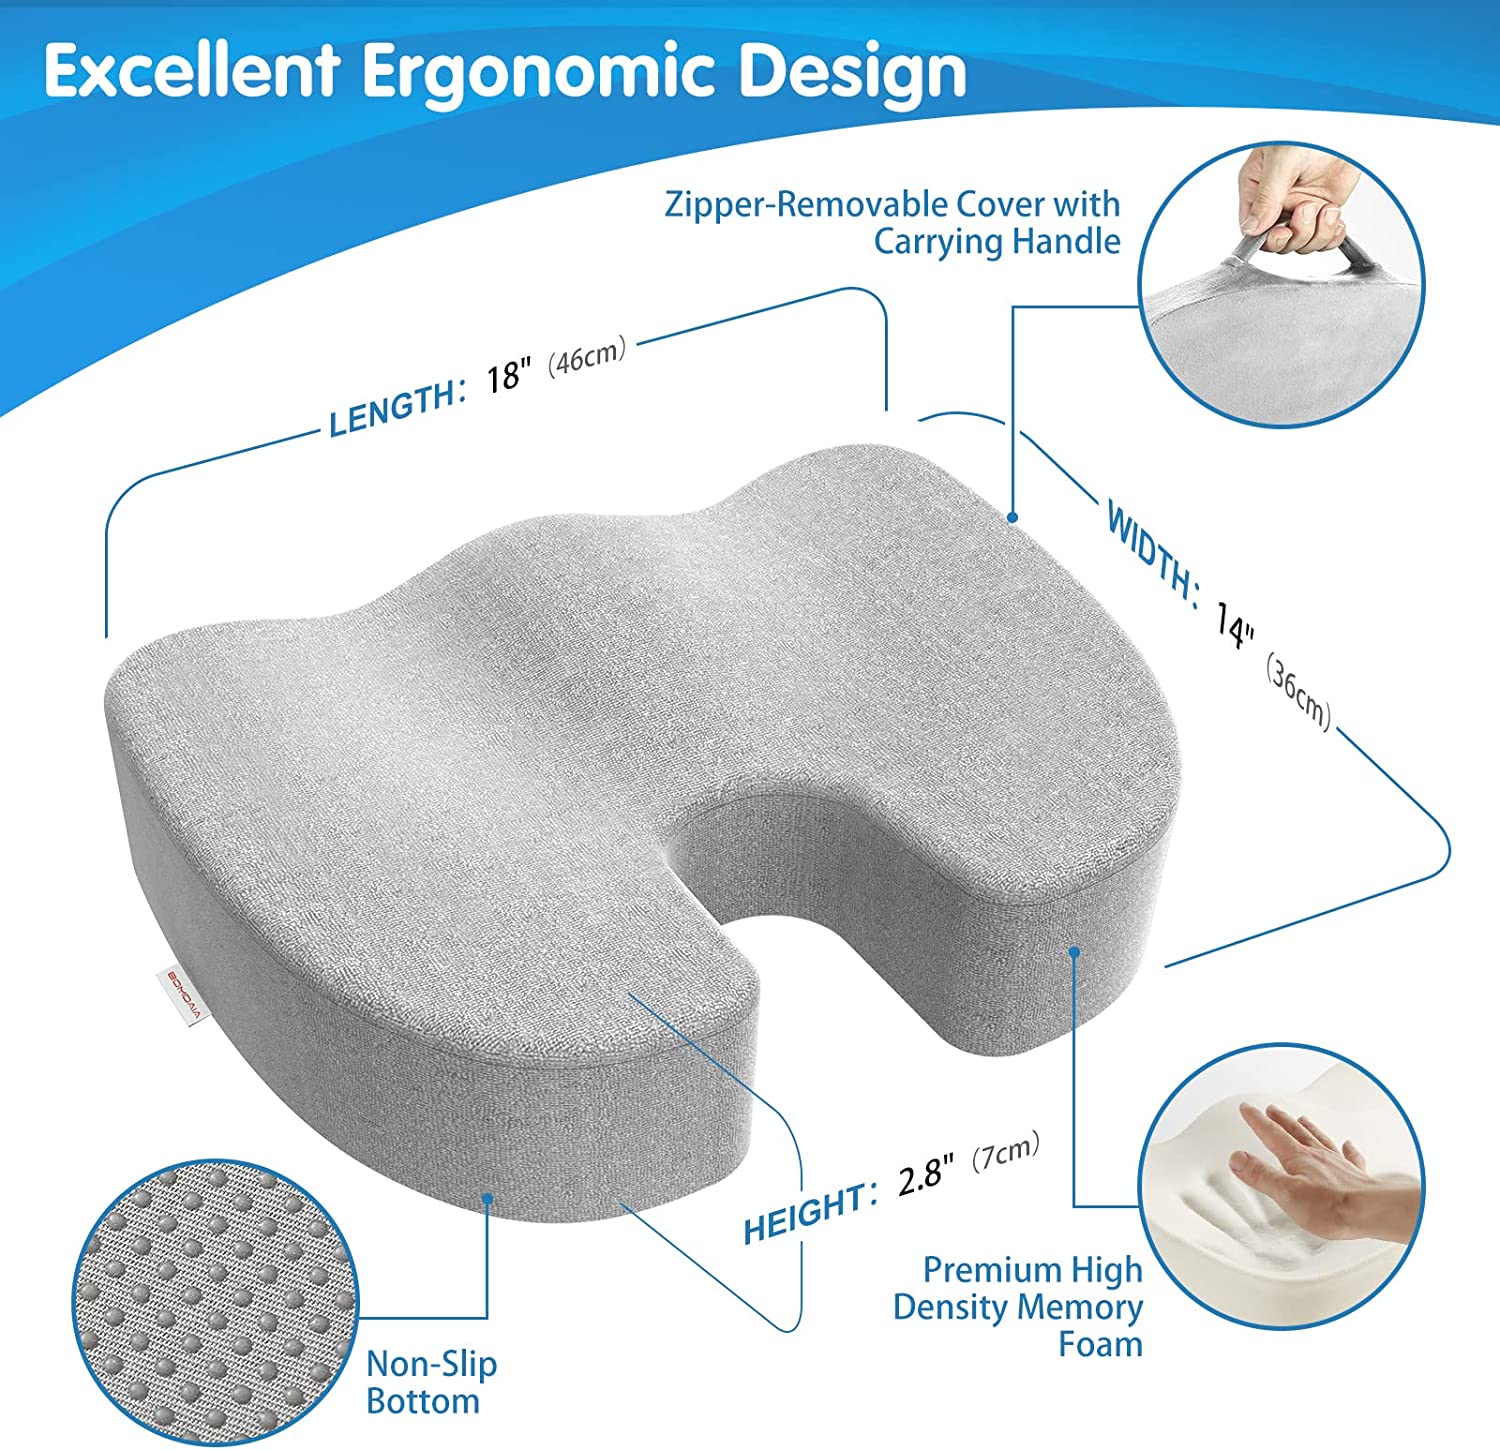 Buy DEBIK Orthopedic Coccyx Donut Pillow Seat Cushion for Lower